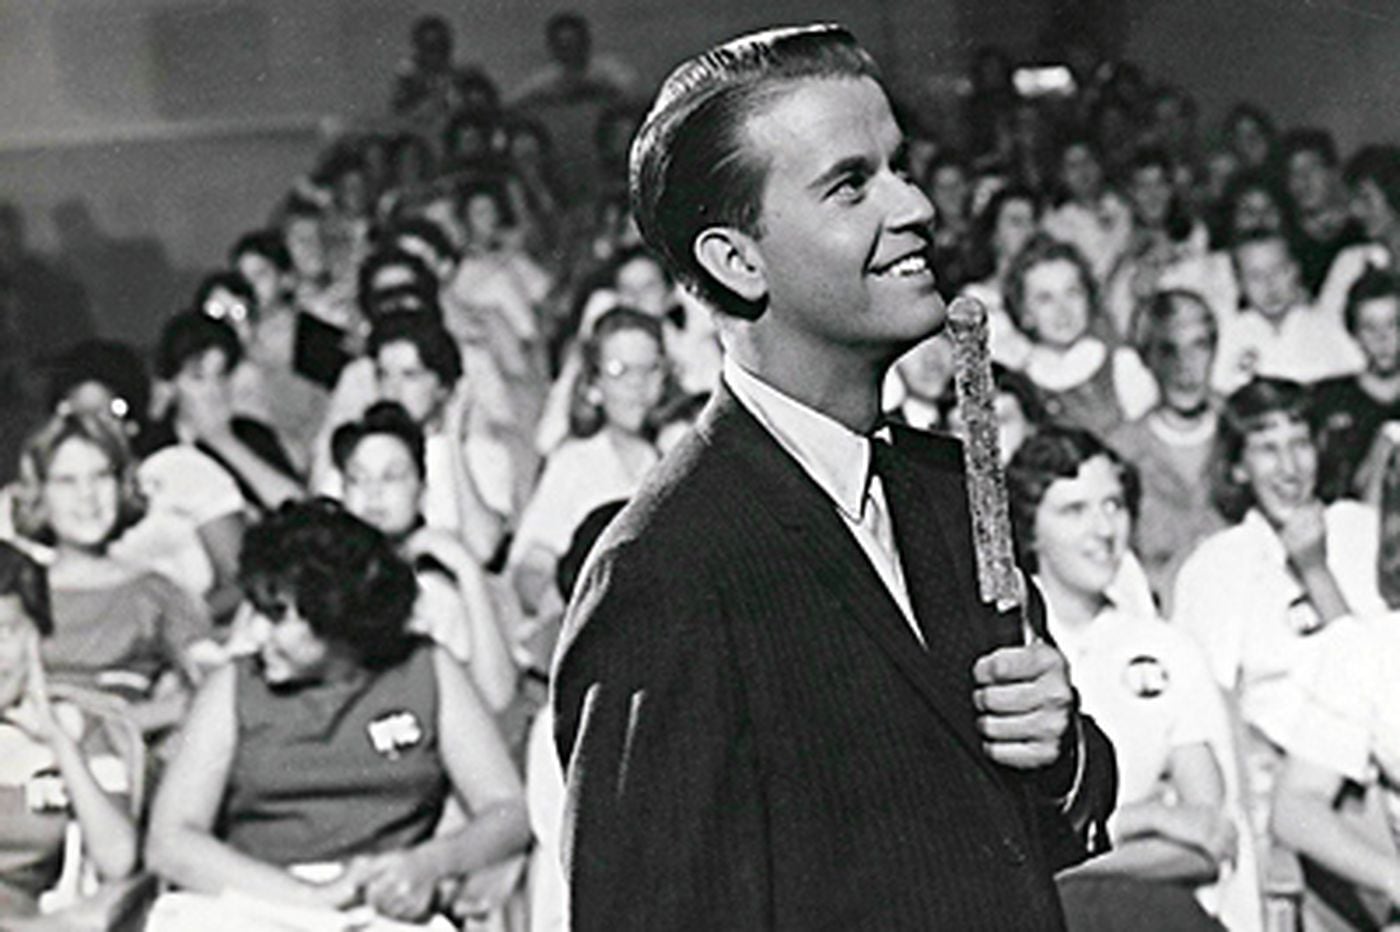 New book on 'American Bandstand' focuses on its Philadelphia roots